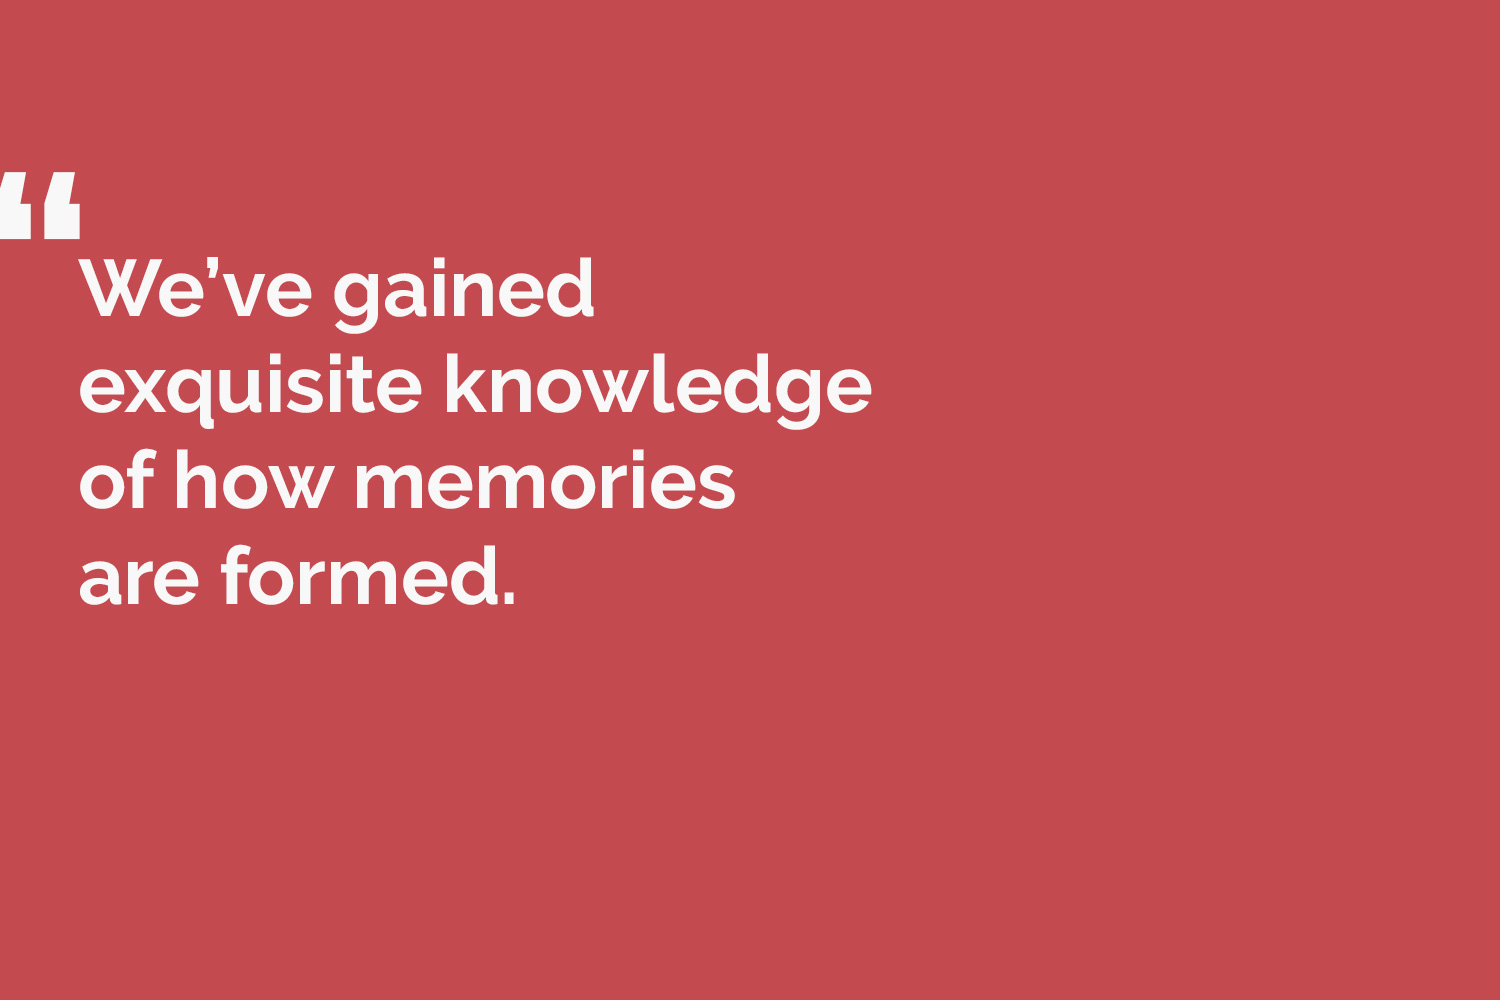 quote card reads: We've gained exquisite knowledge of how memories are formed.